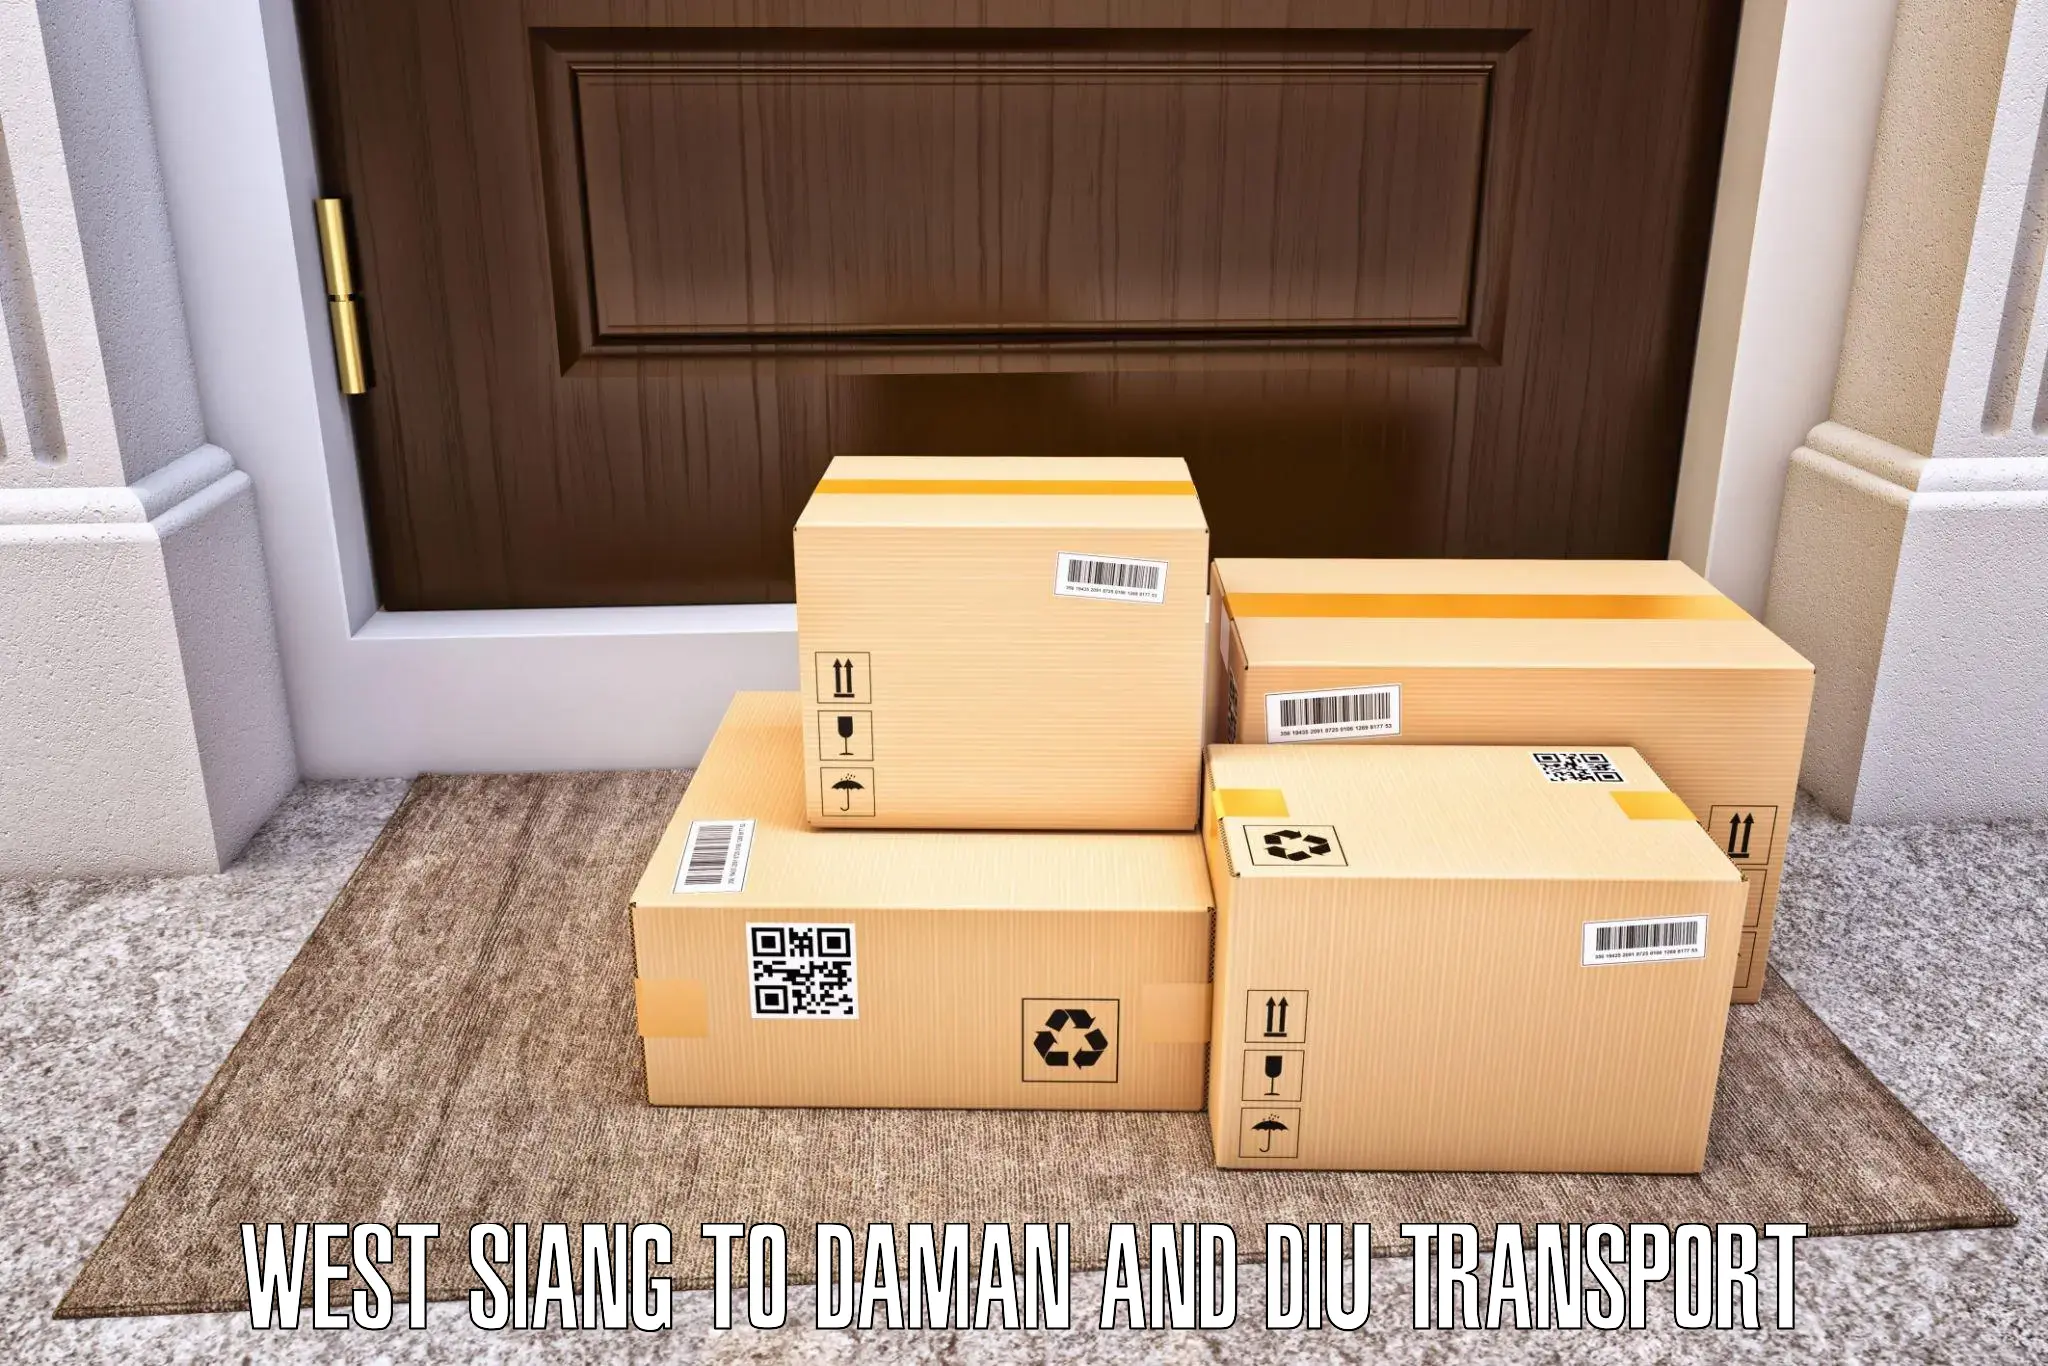 Road transport online services West Siang to Daman and Diu